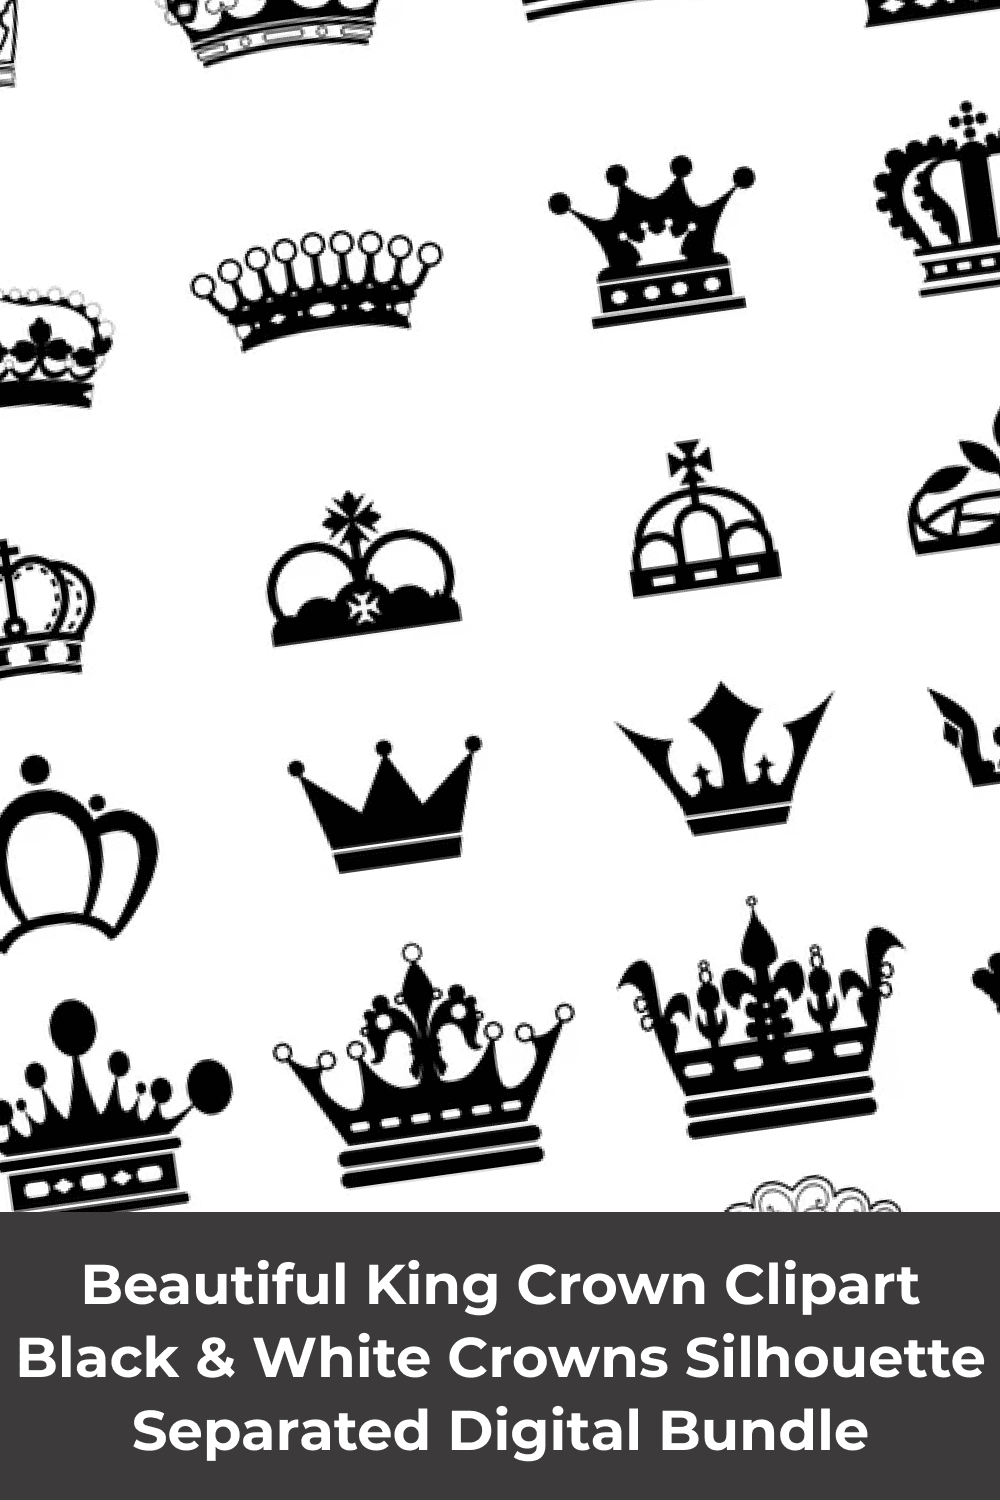 Big variety of crowns for real queens and kings.